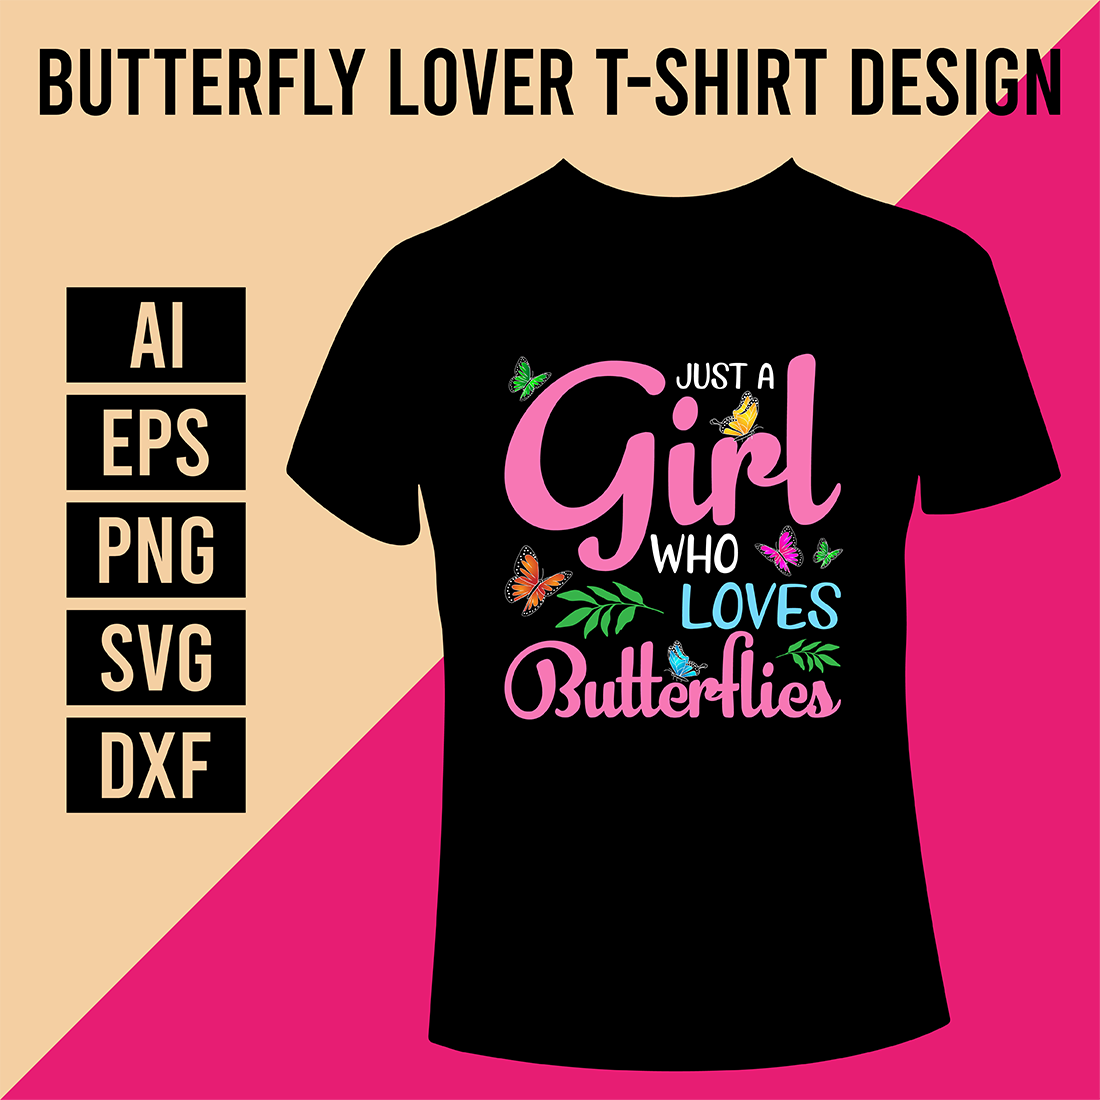 Butterfly Lover T-Shirt Design cover image.